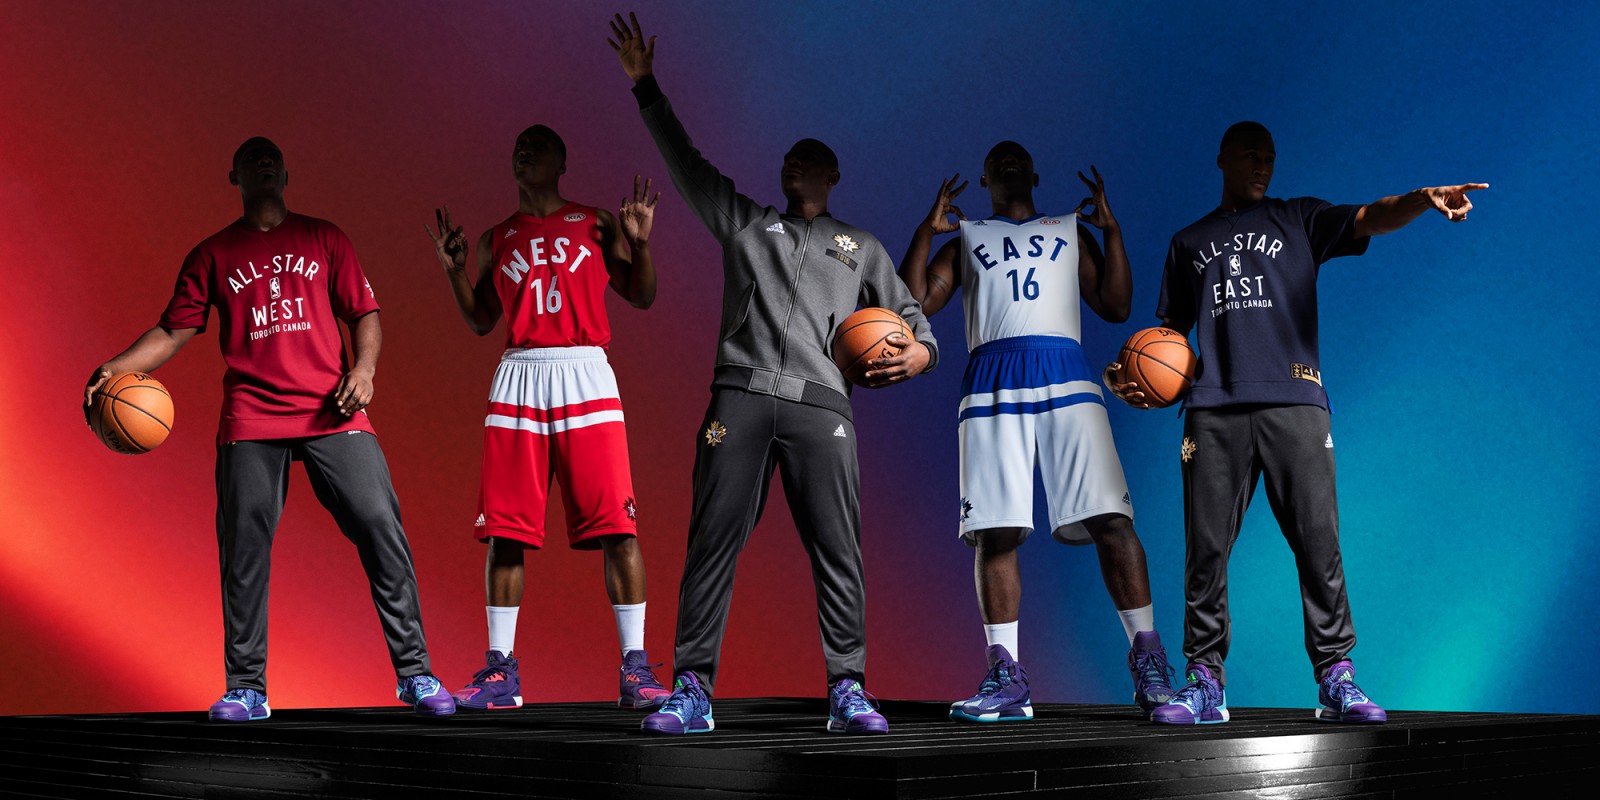 Check Out the NBA's Toronto-Inspired All-Star Jerseys - Sharp Magazine